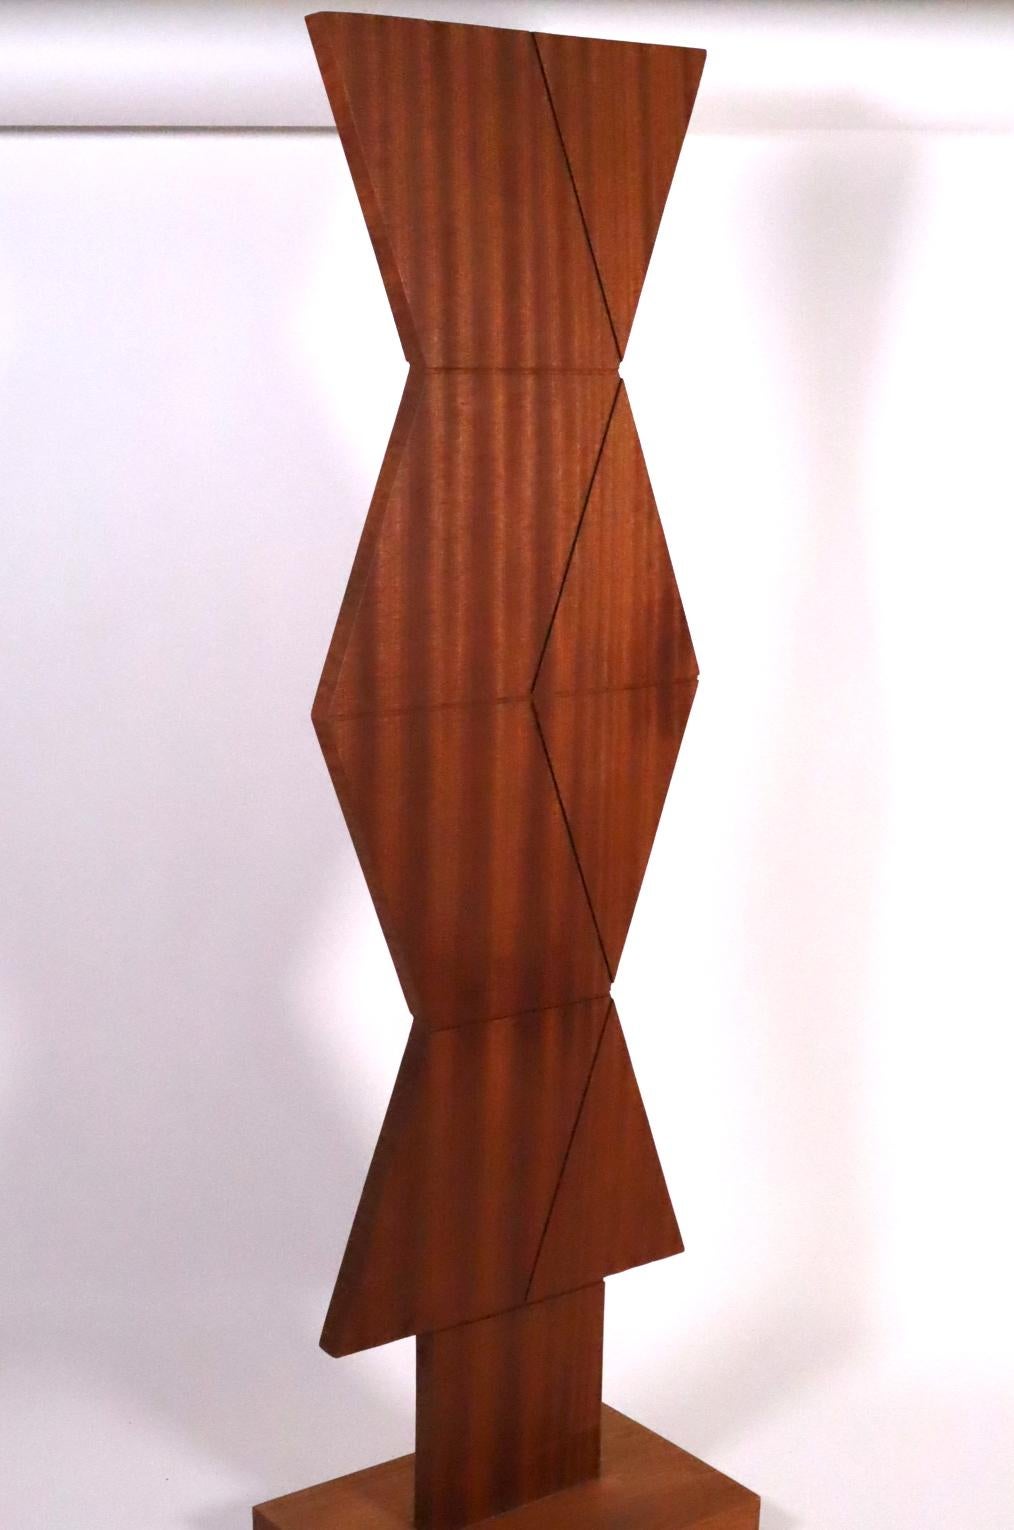 Wood Sculpture 1971 abstract geometric illusion INVENTORY CLEARANCE SALE For Sale 2